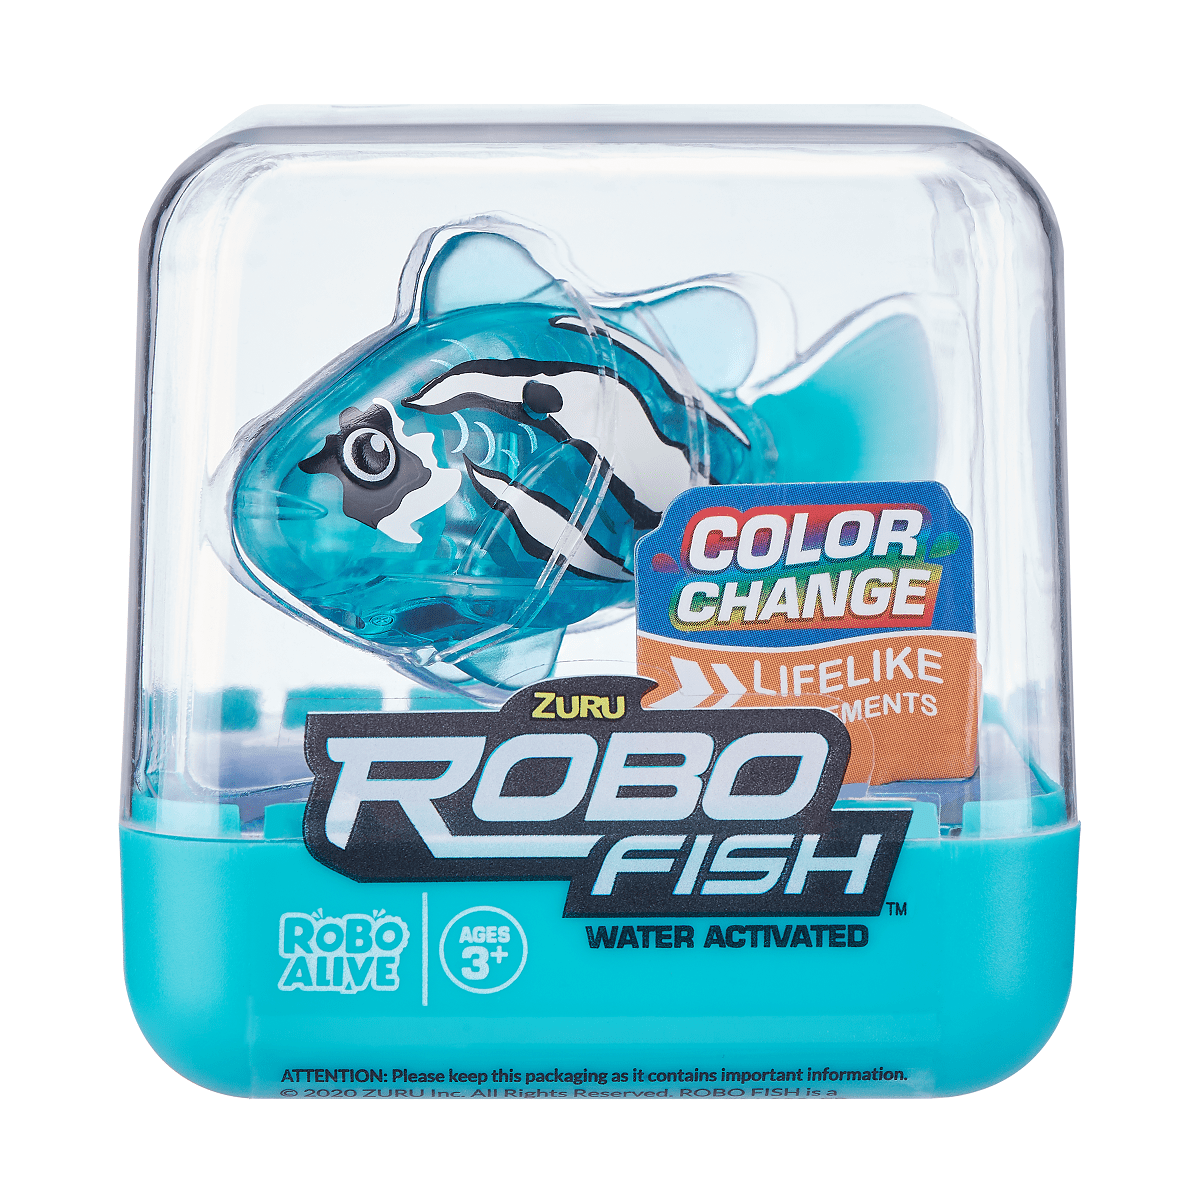 ZURU Robo Alive Turtles & Fish Robotic Operated Swimming Toys Complete Set of 4 for sale online 